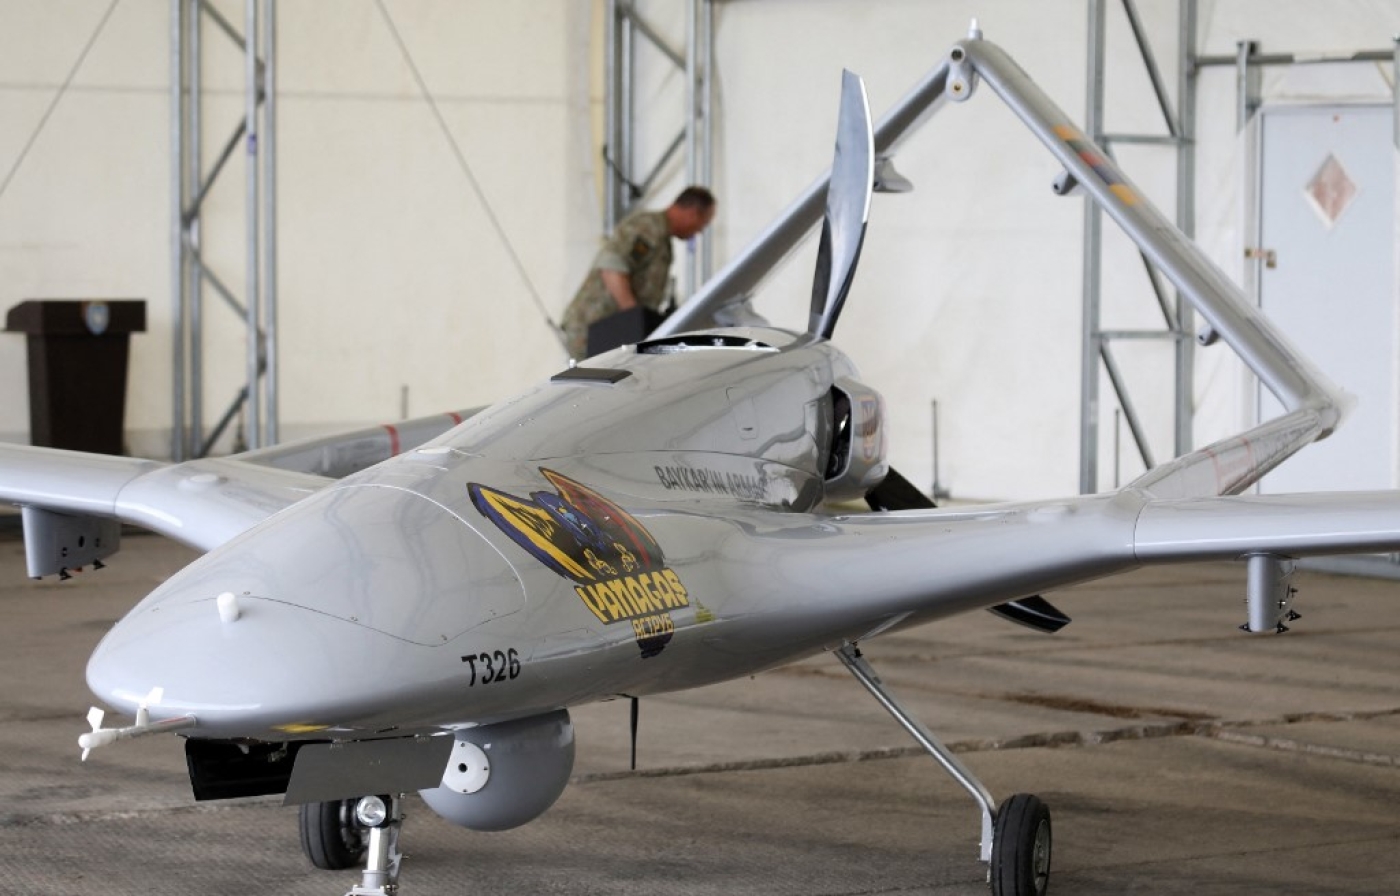 A Turkish Bayraktar TB2 combat drone is on view during a presentation at the Lithuanian Air Force Base in Siauliai, Lithuania, on July 6, 2022.  (AFP)